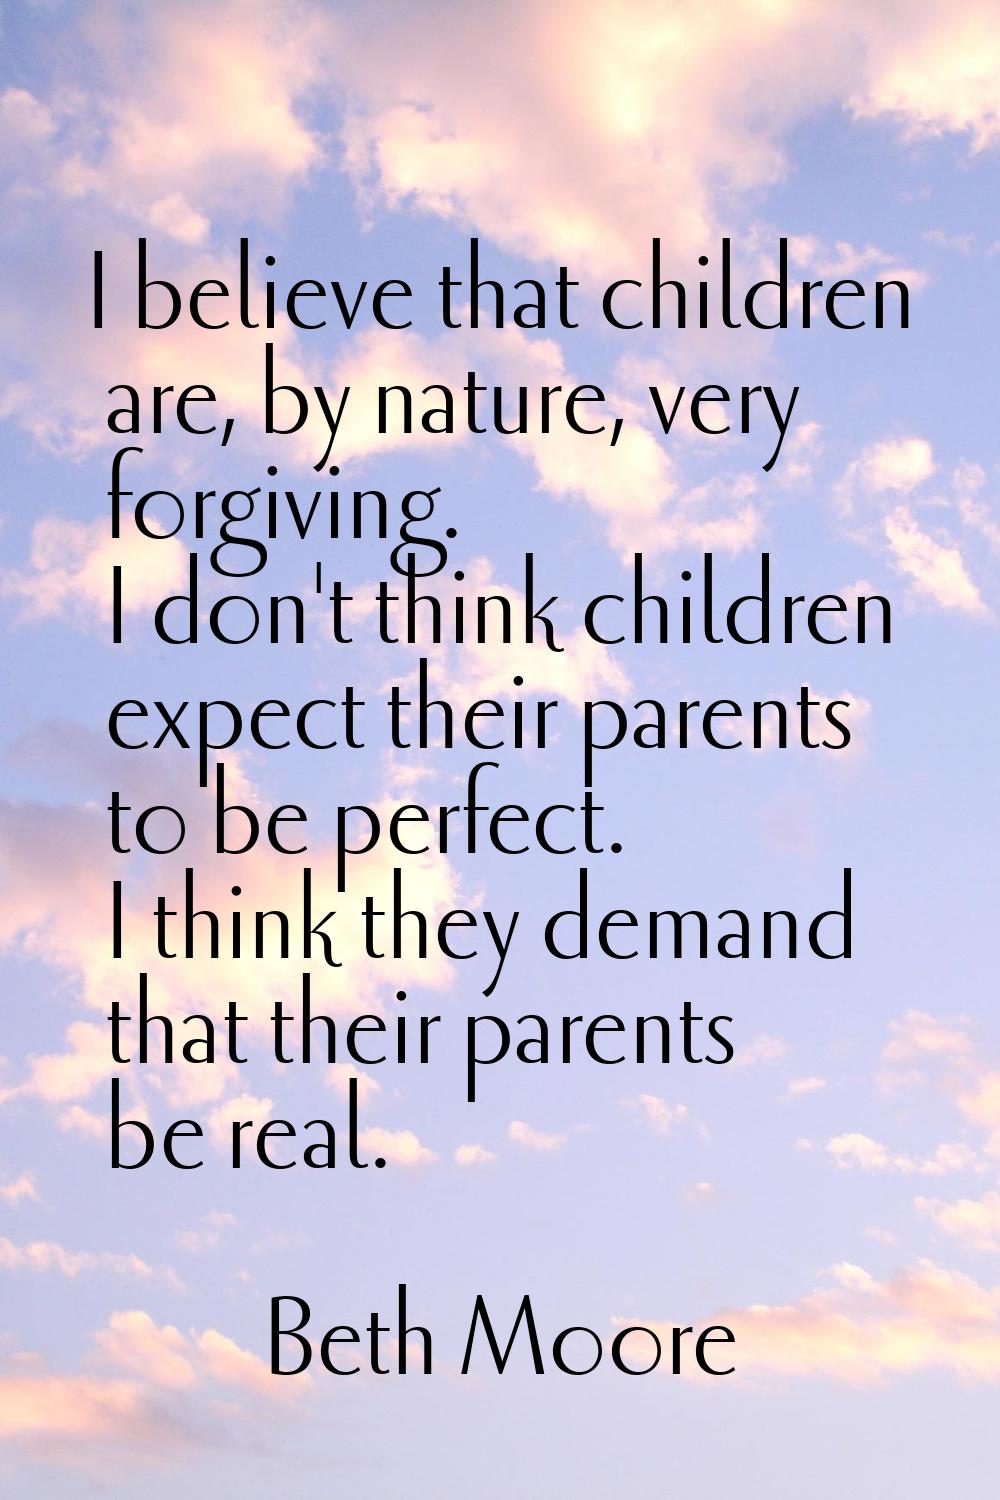 I believe that children are, by nature, very forgiving. I don't think children expect their parents